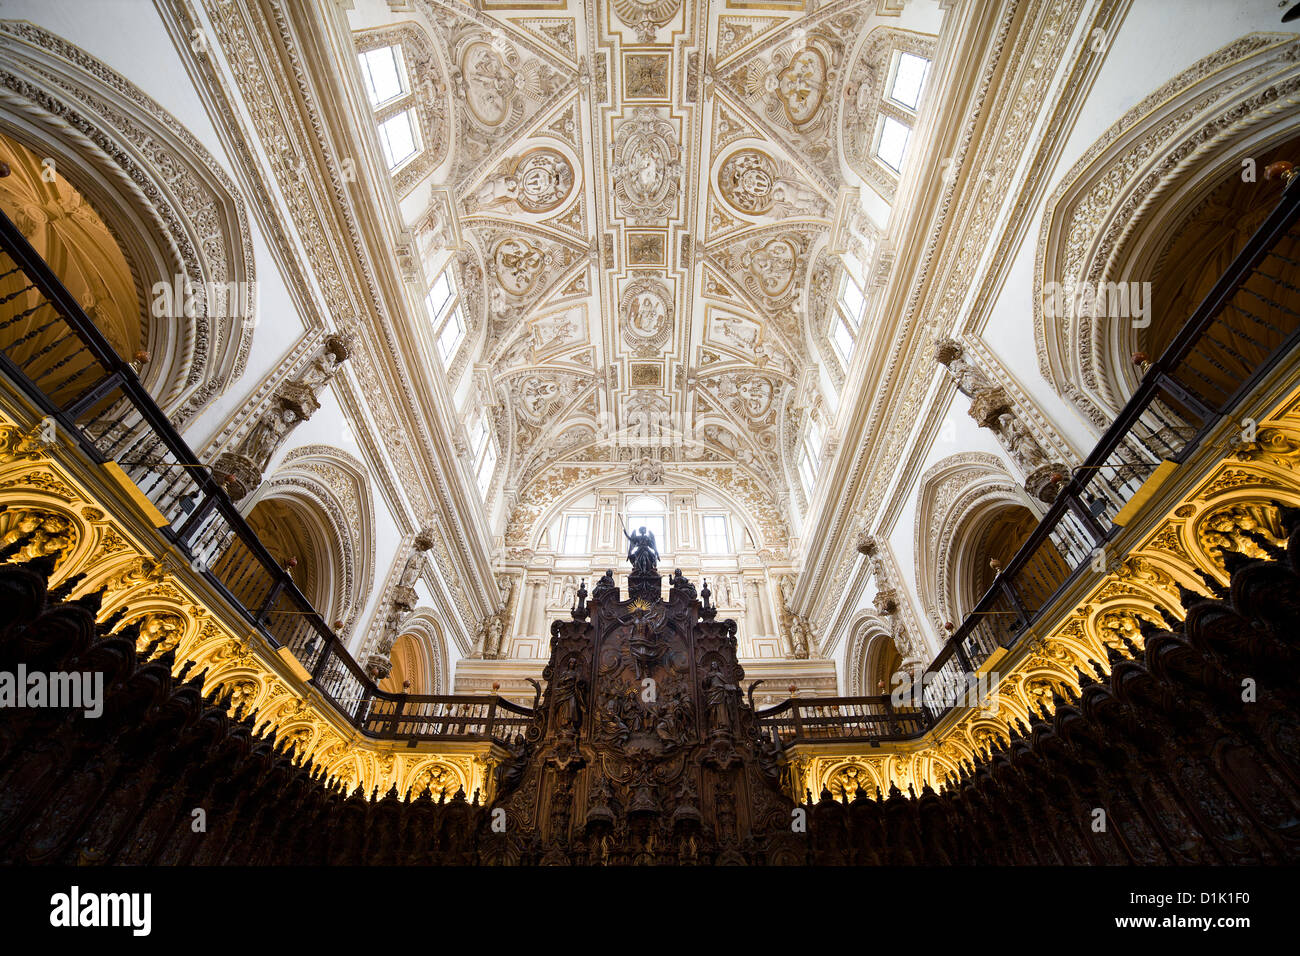 Mahogany choir stalls and lunette vault above inside the marvellous Mezquita Cathedral in Cordoba, Andalucia, Spain. Stock Photo